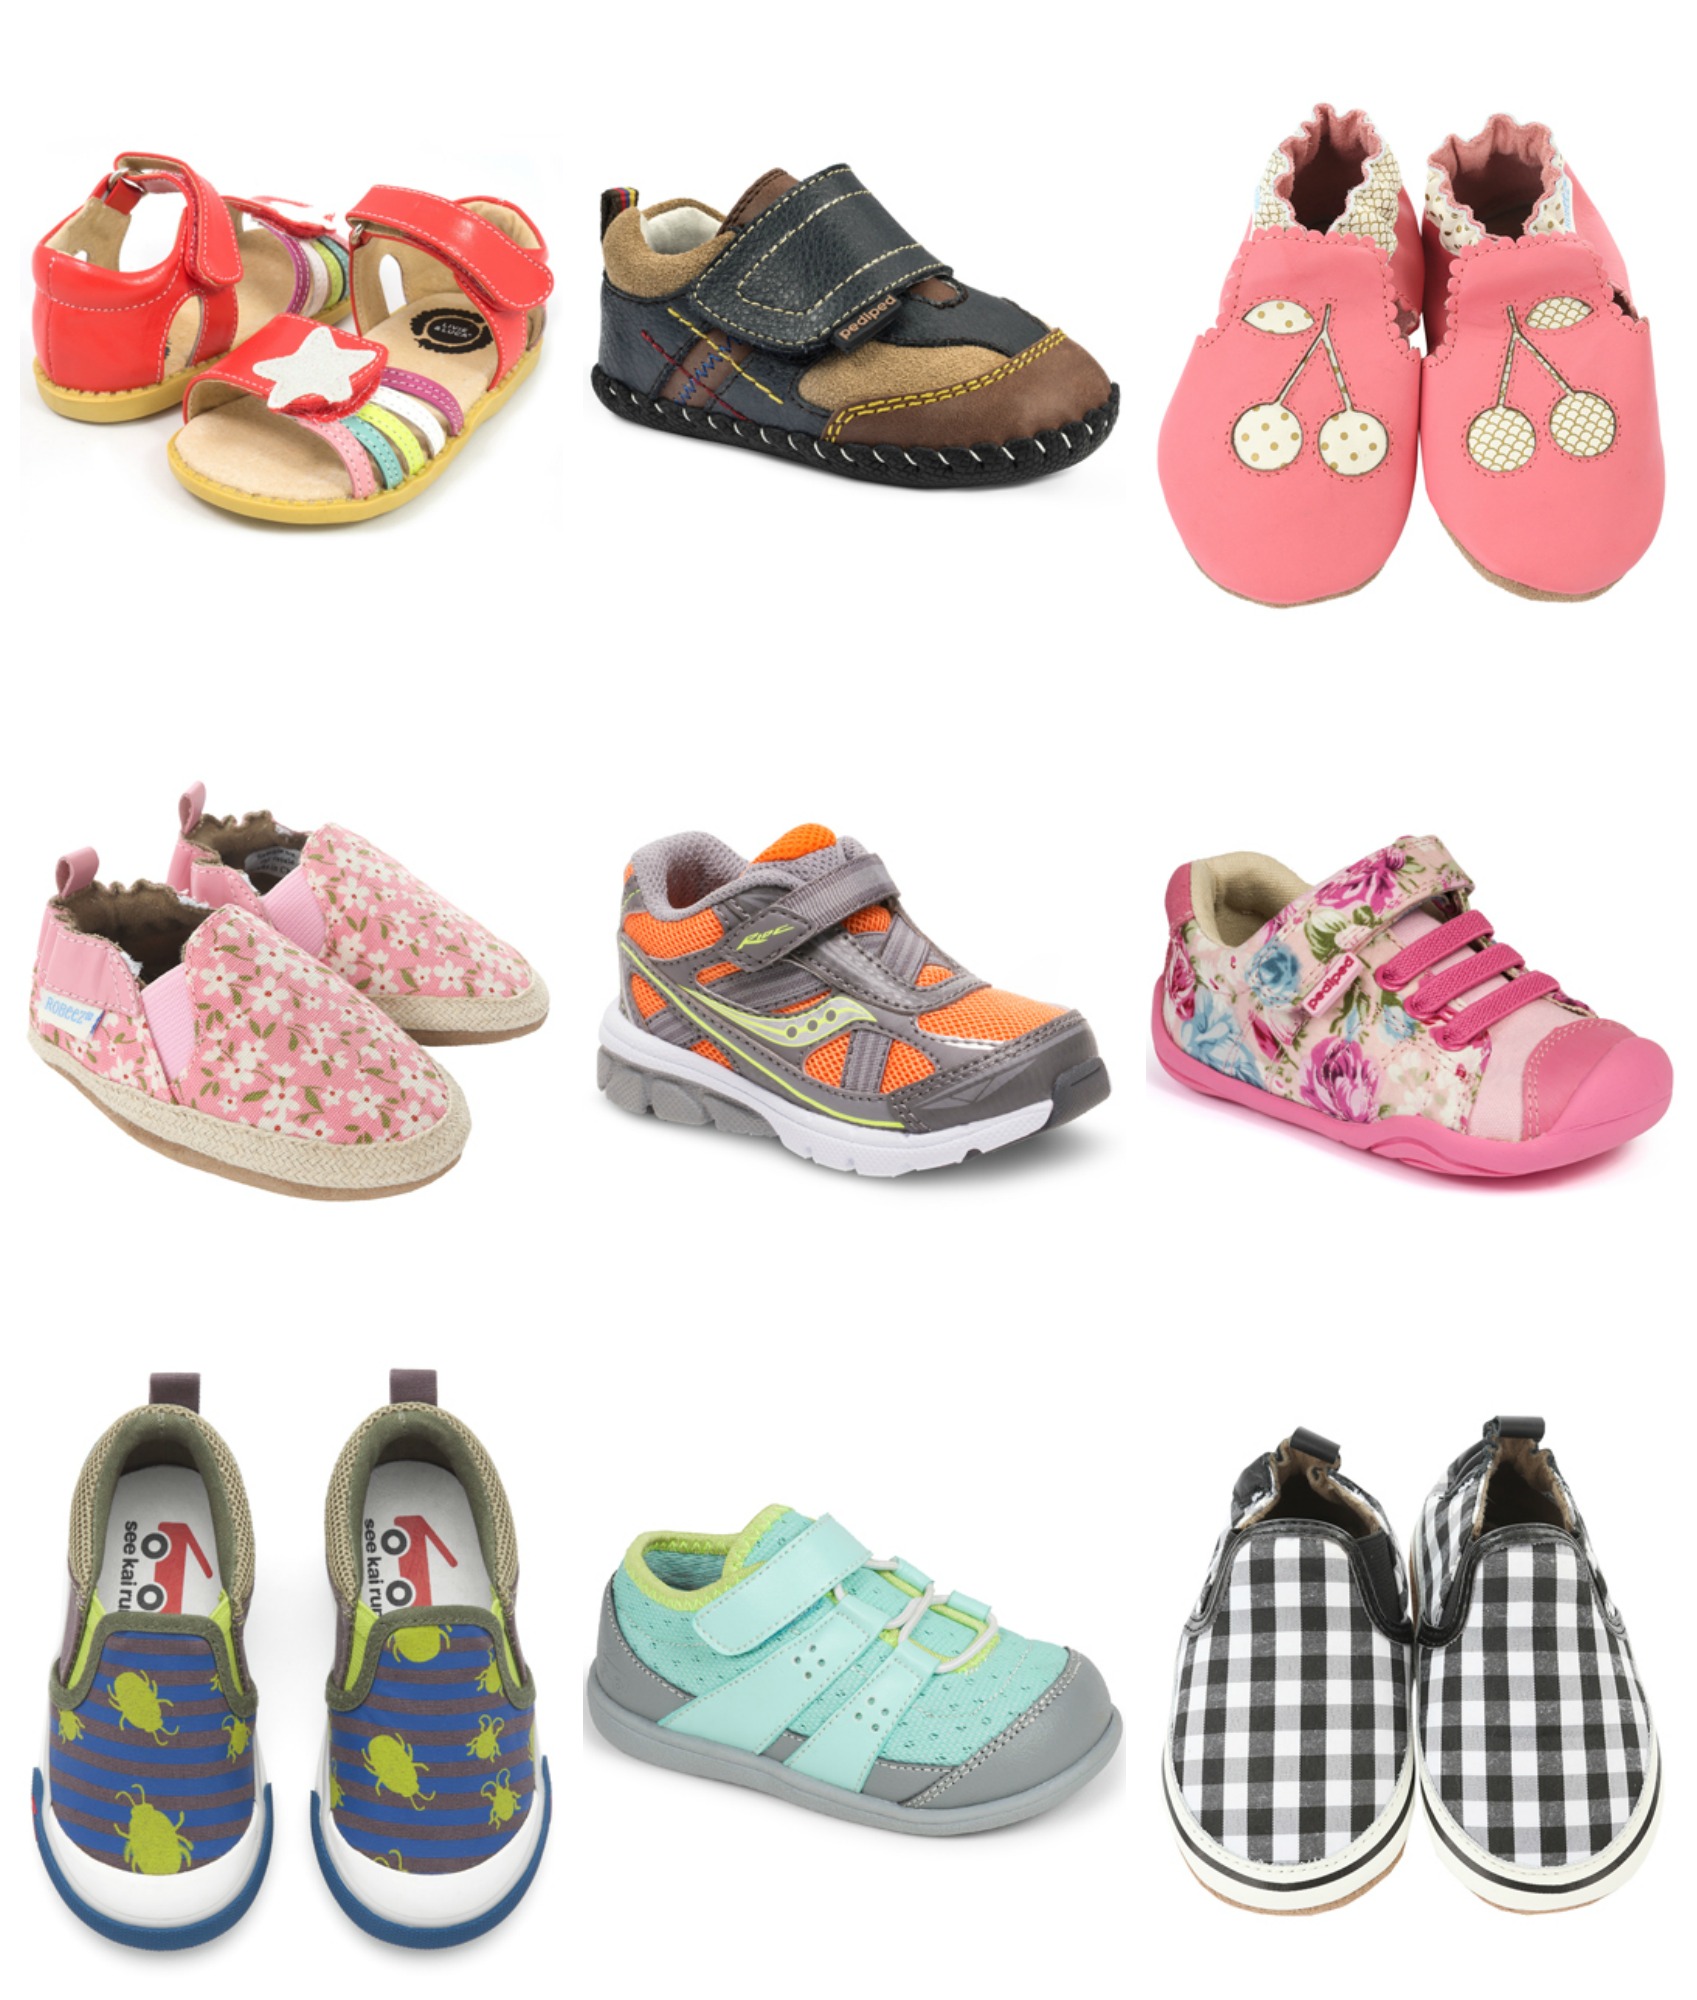 TinySoles Baby and Kids Shoes Review and Giveaway